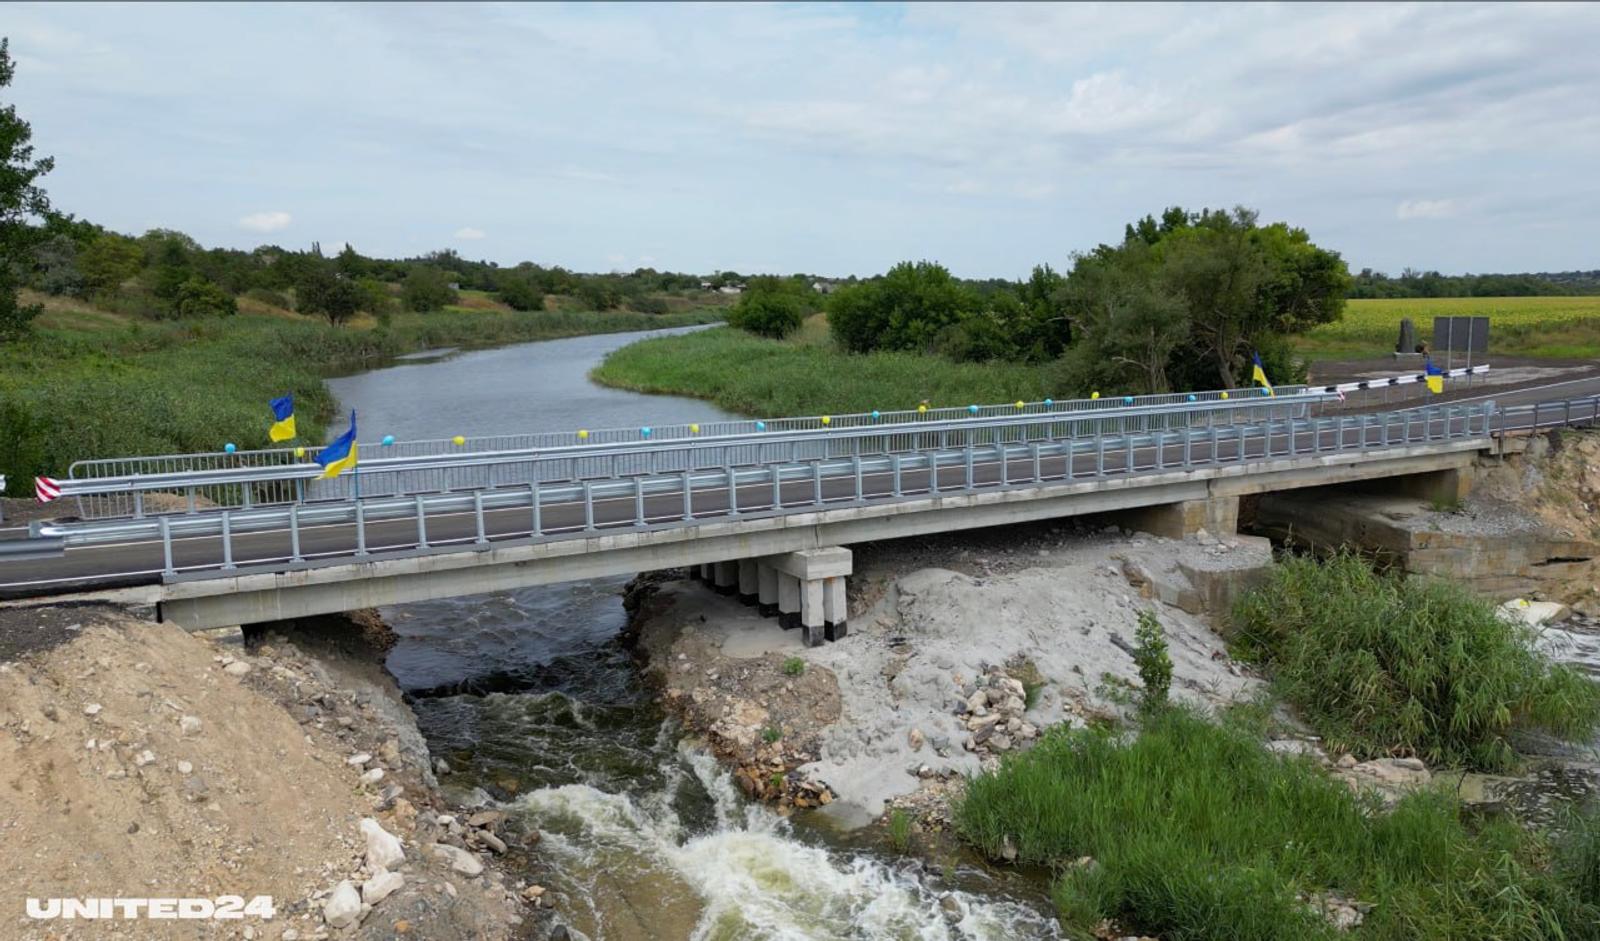 Another bridge across the Inhulets River was built with funds from UNITED24 donors